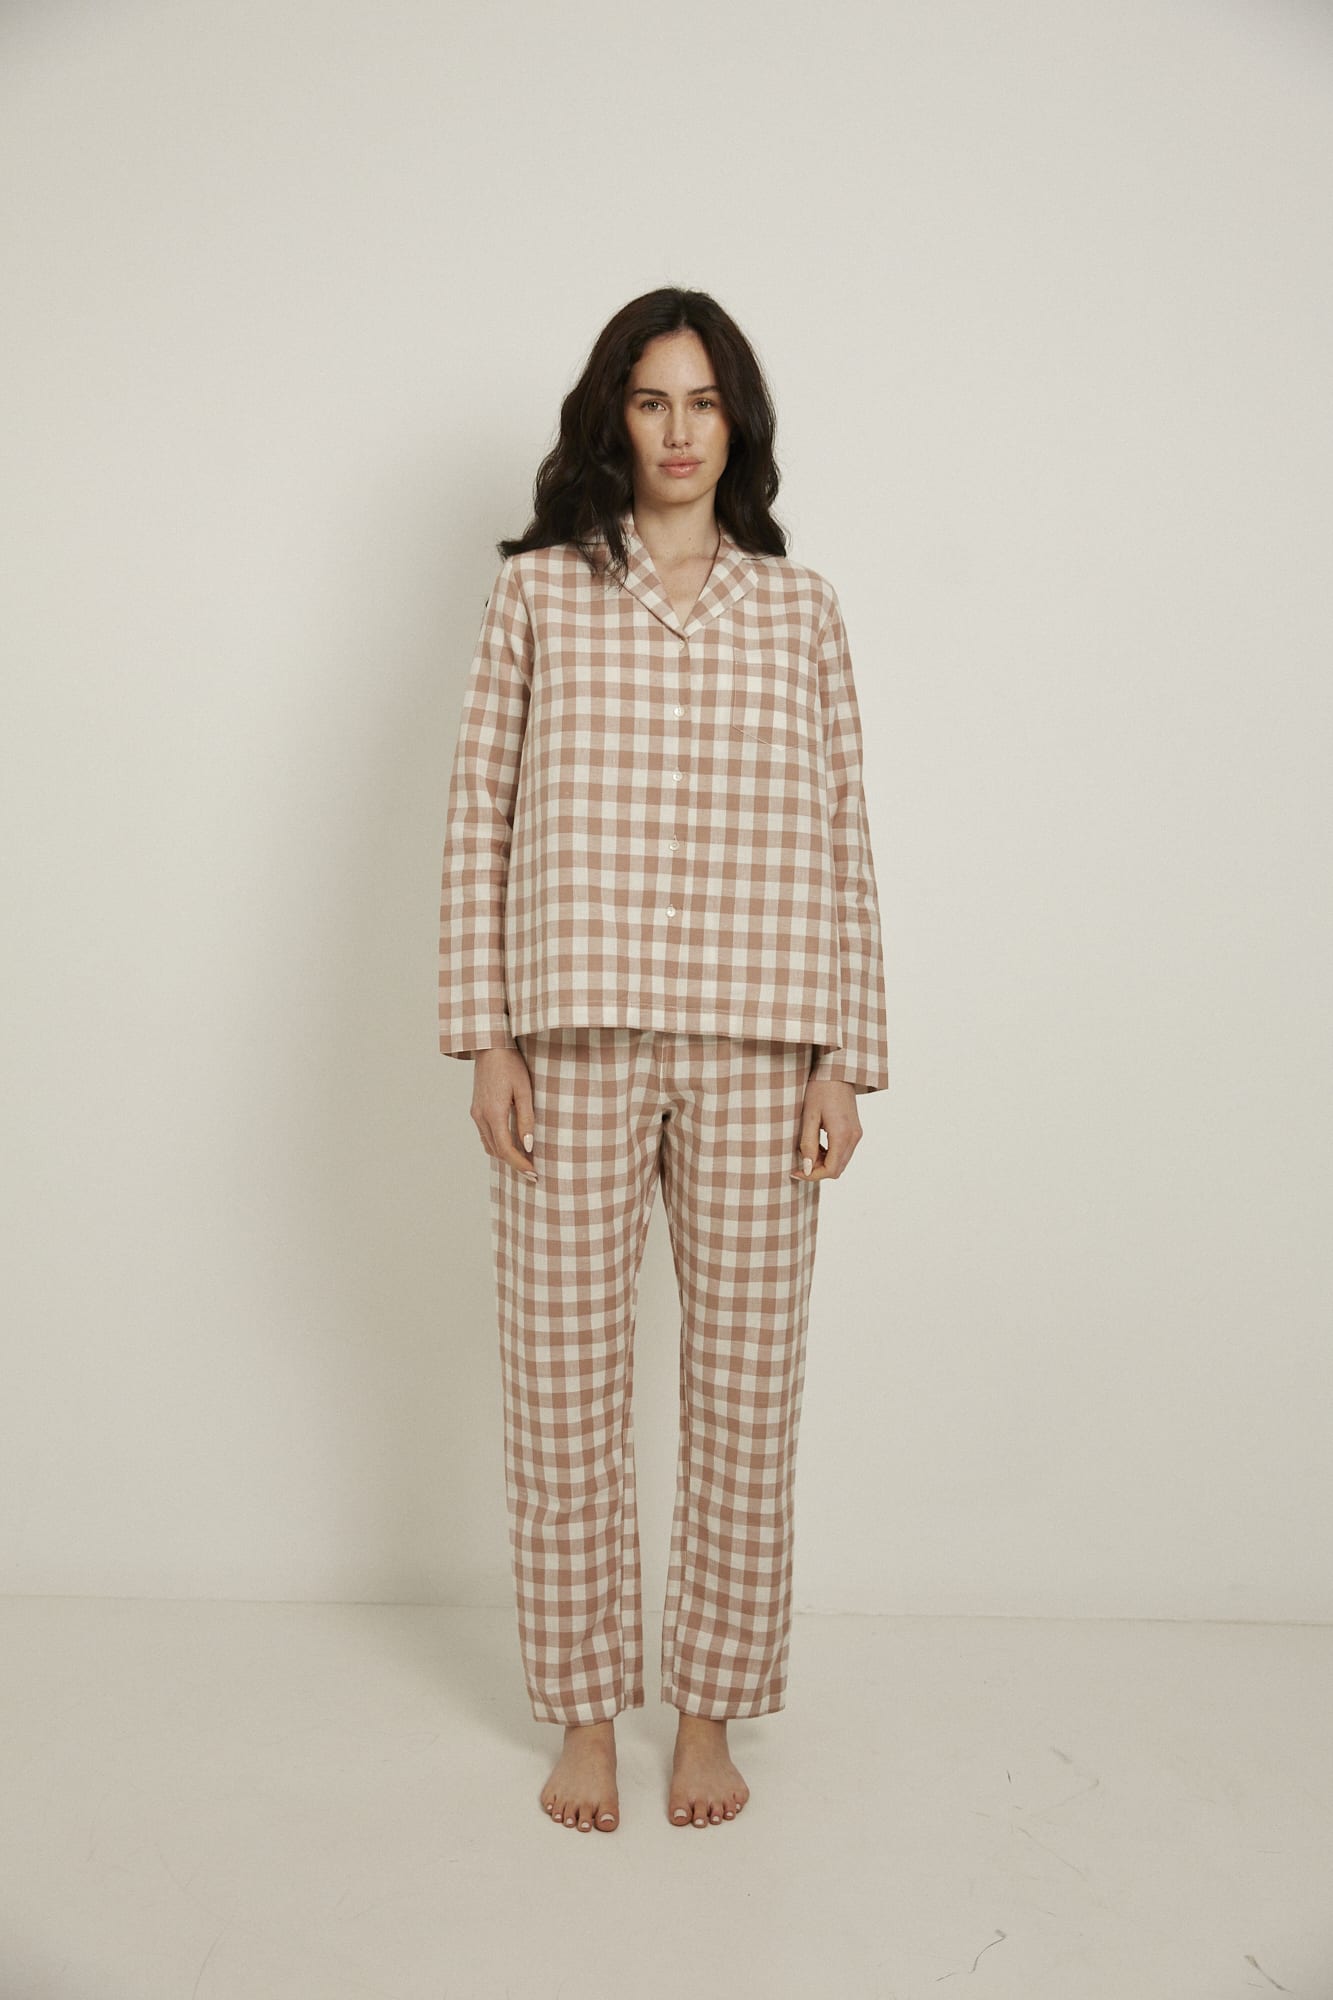 Women’s pyjama set including a long sleeve shirt and long sleeve pants. Made from an organic cotton and linen blend, in a pink and white check.  The shirt has shell buttons, a front pocket and a back pleat.  The pants feature an elasticated waistband for comfort.